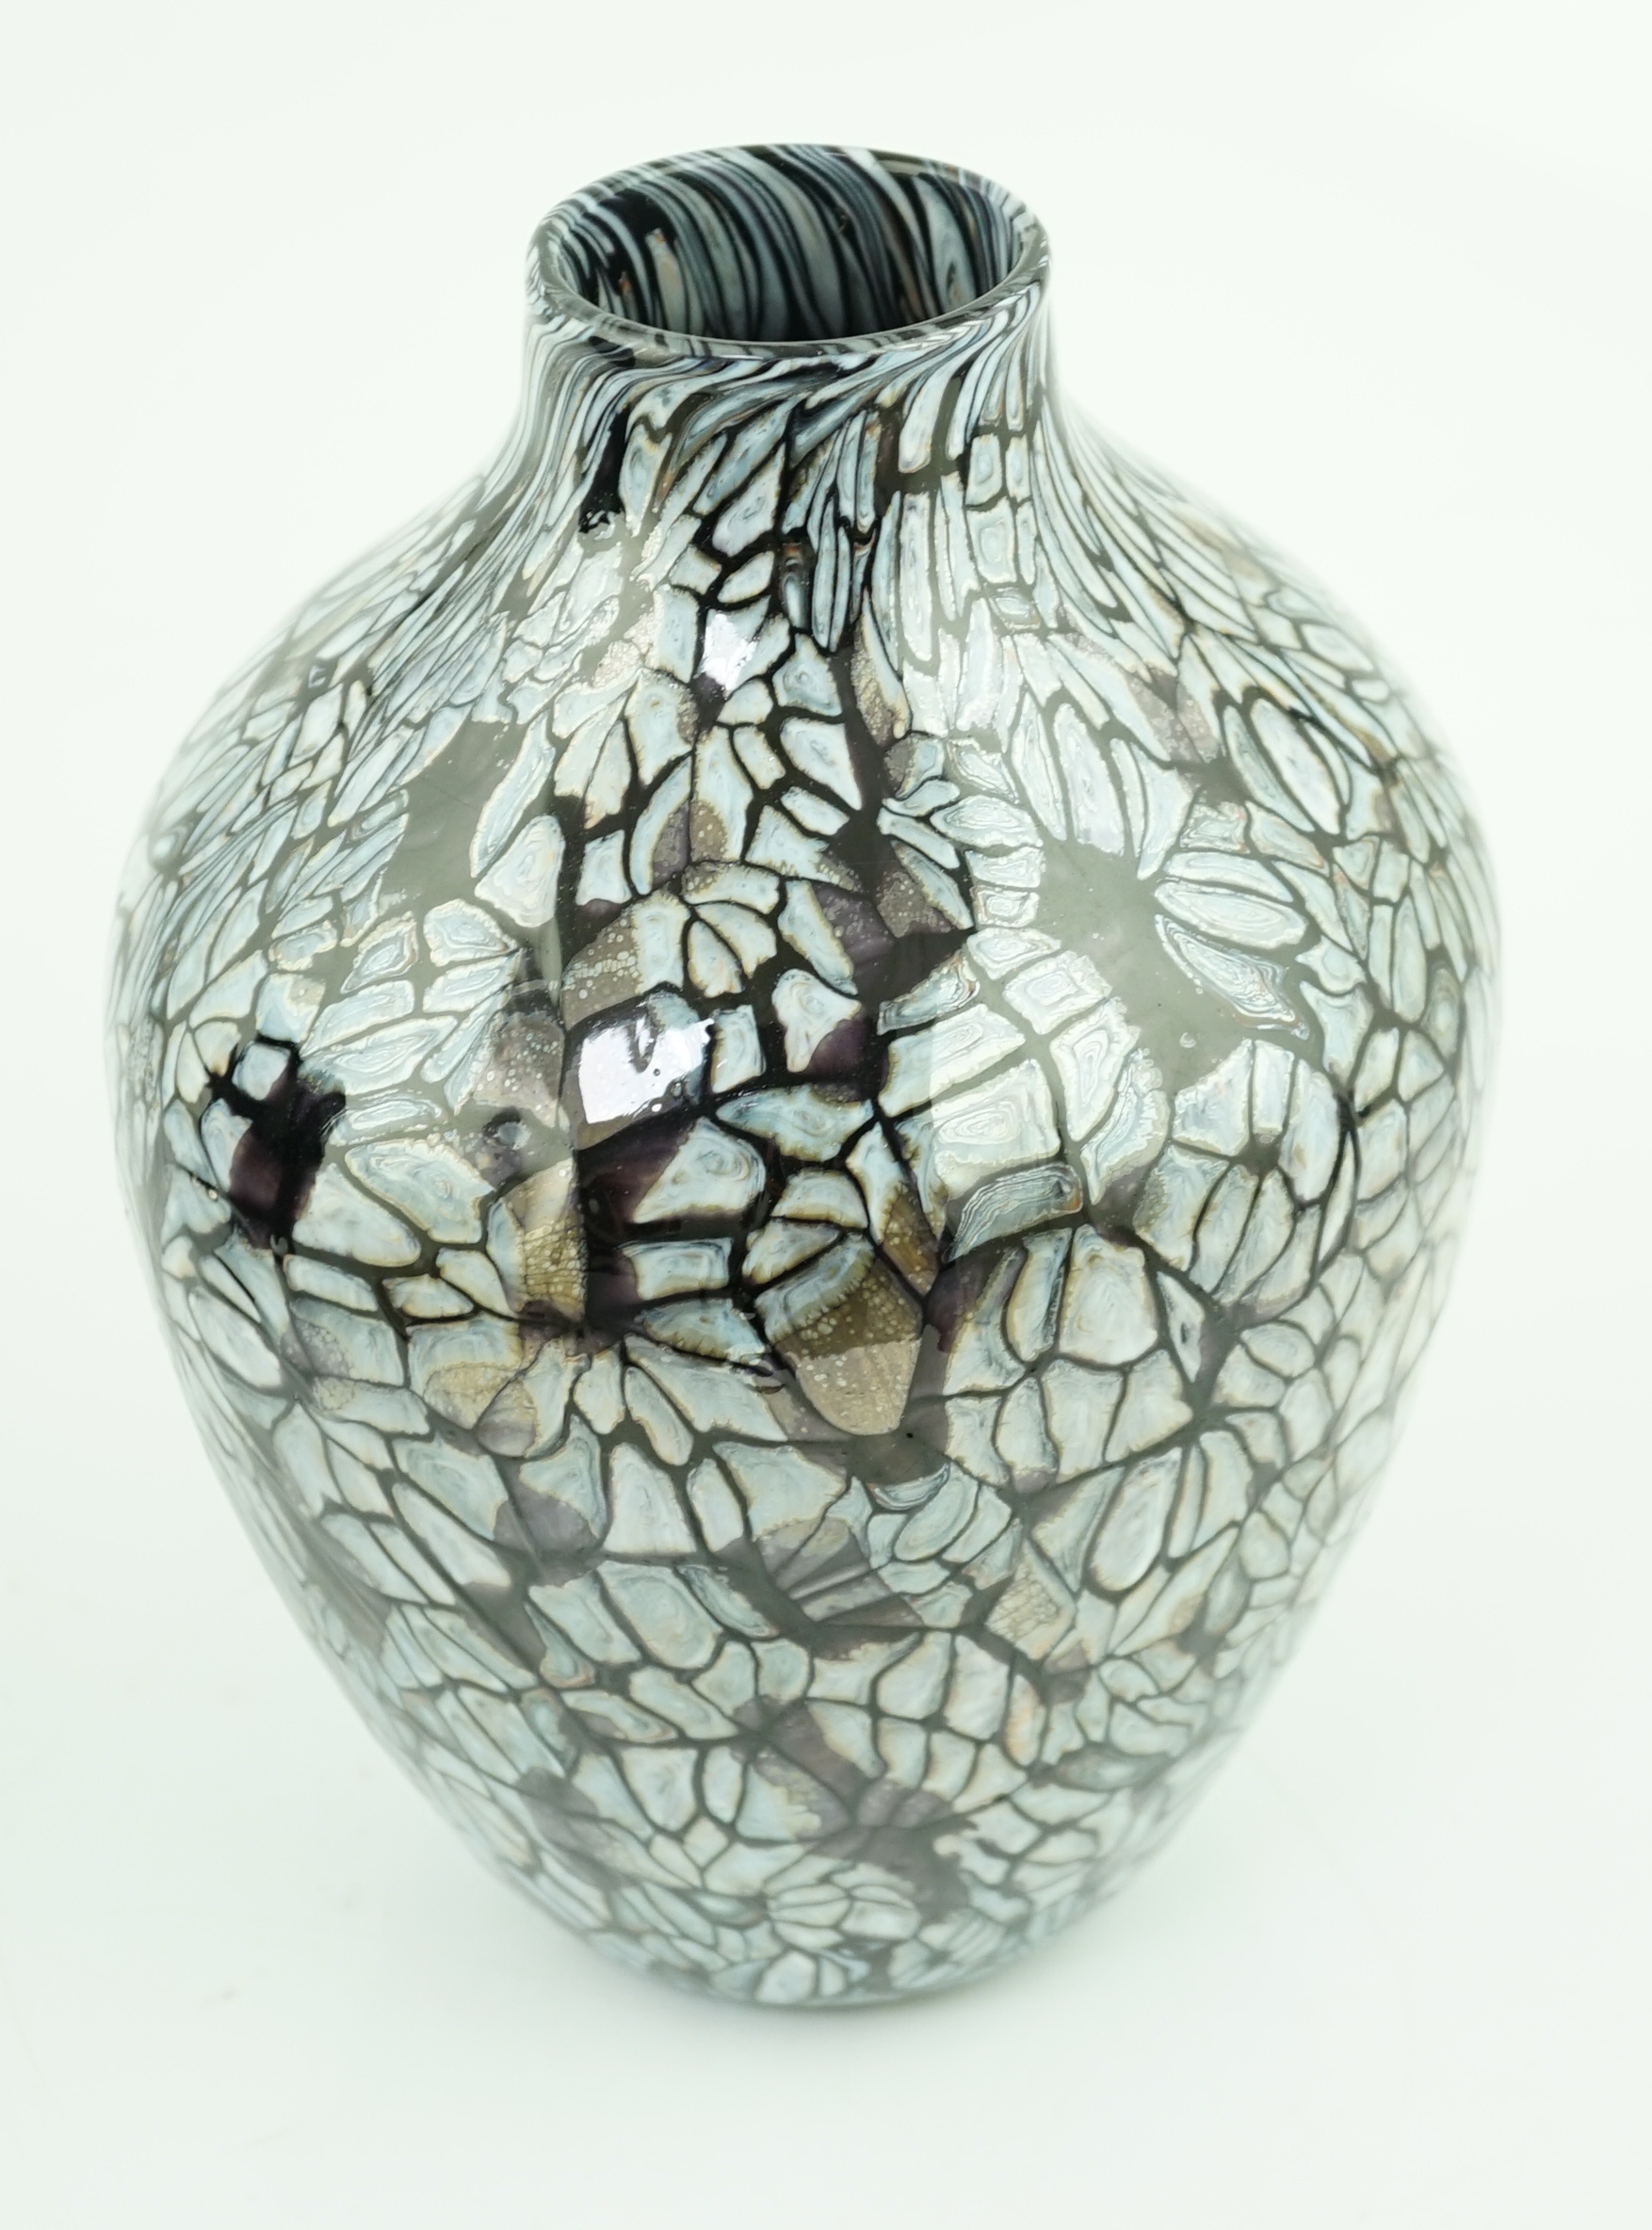 Vittorio Ferro (1932-2012) A Murano glass Murrine vase, ovoid shaped, with a pale blue and brown foliate design, unsigned, 23cm, Please note this lot attracts an additional import tax of 20% on the hammer price